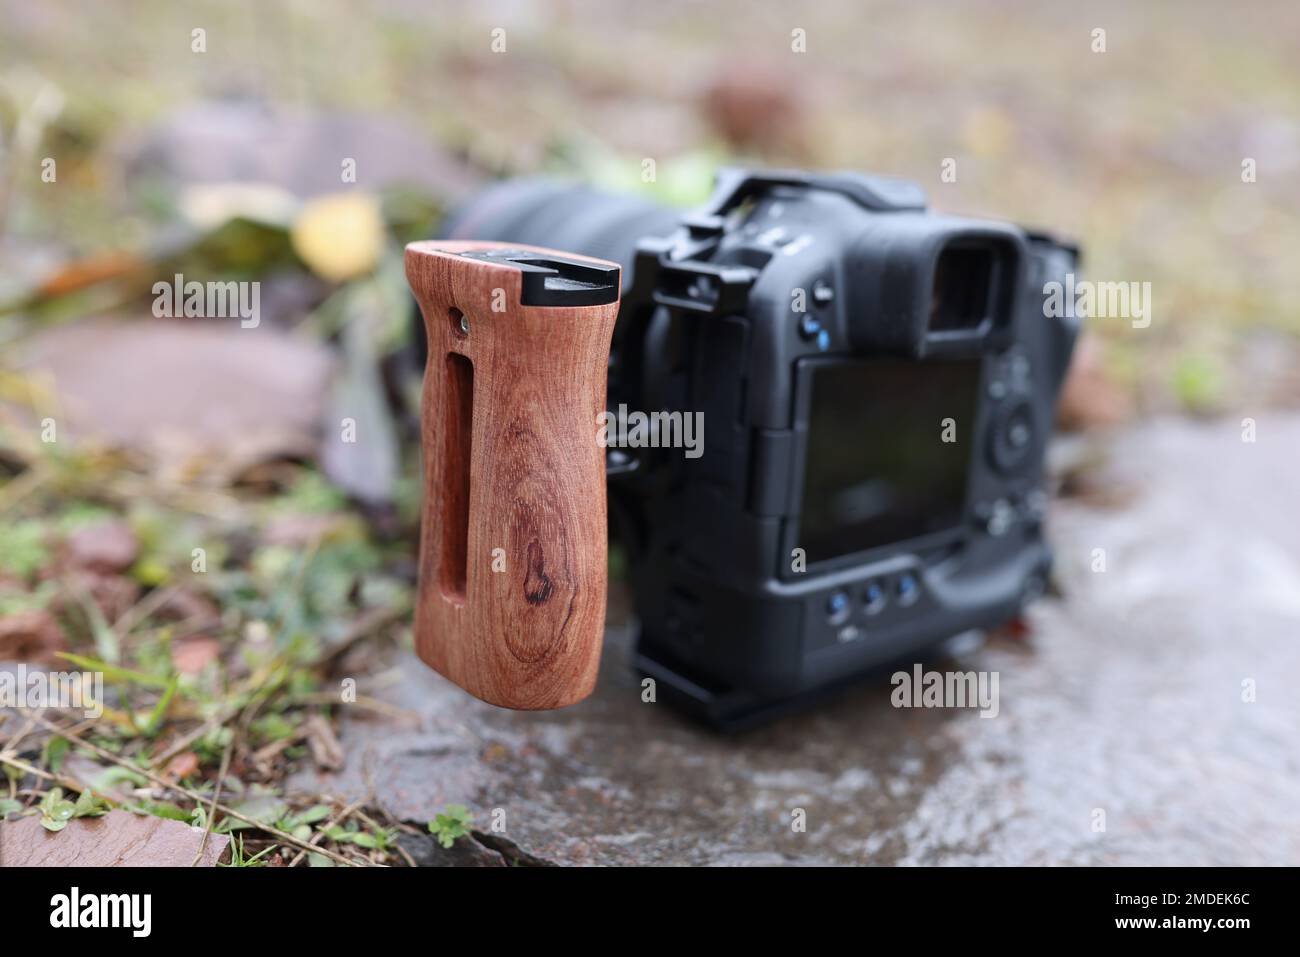 Photo camera with side handle outdoors close-up. Stock Photo